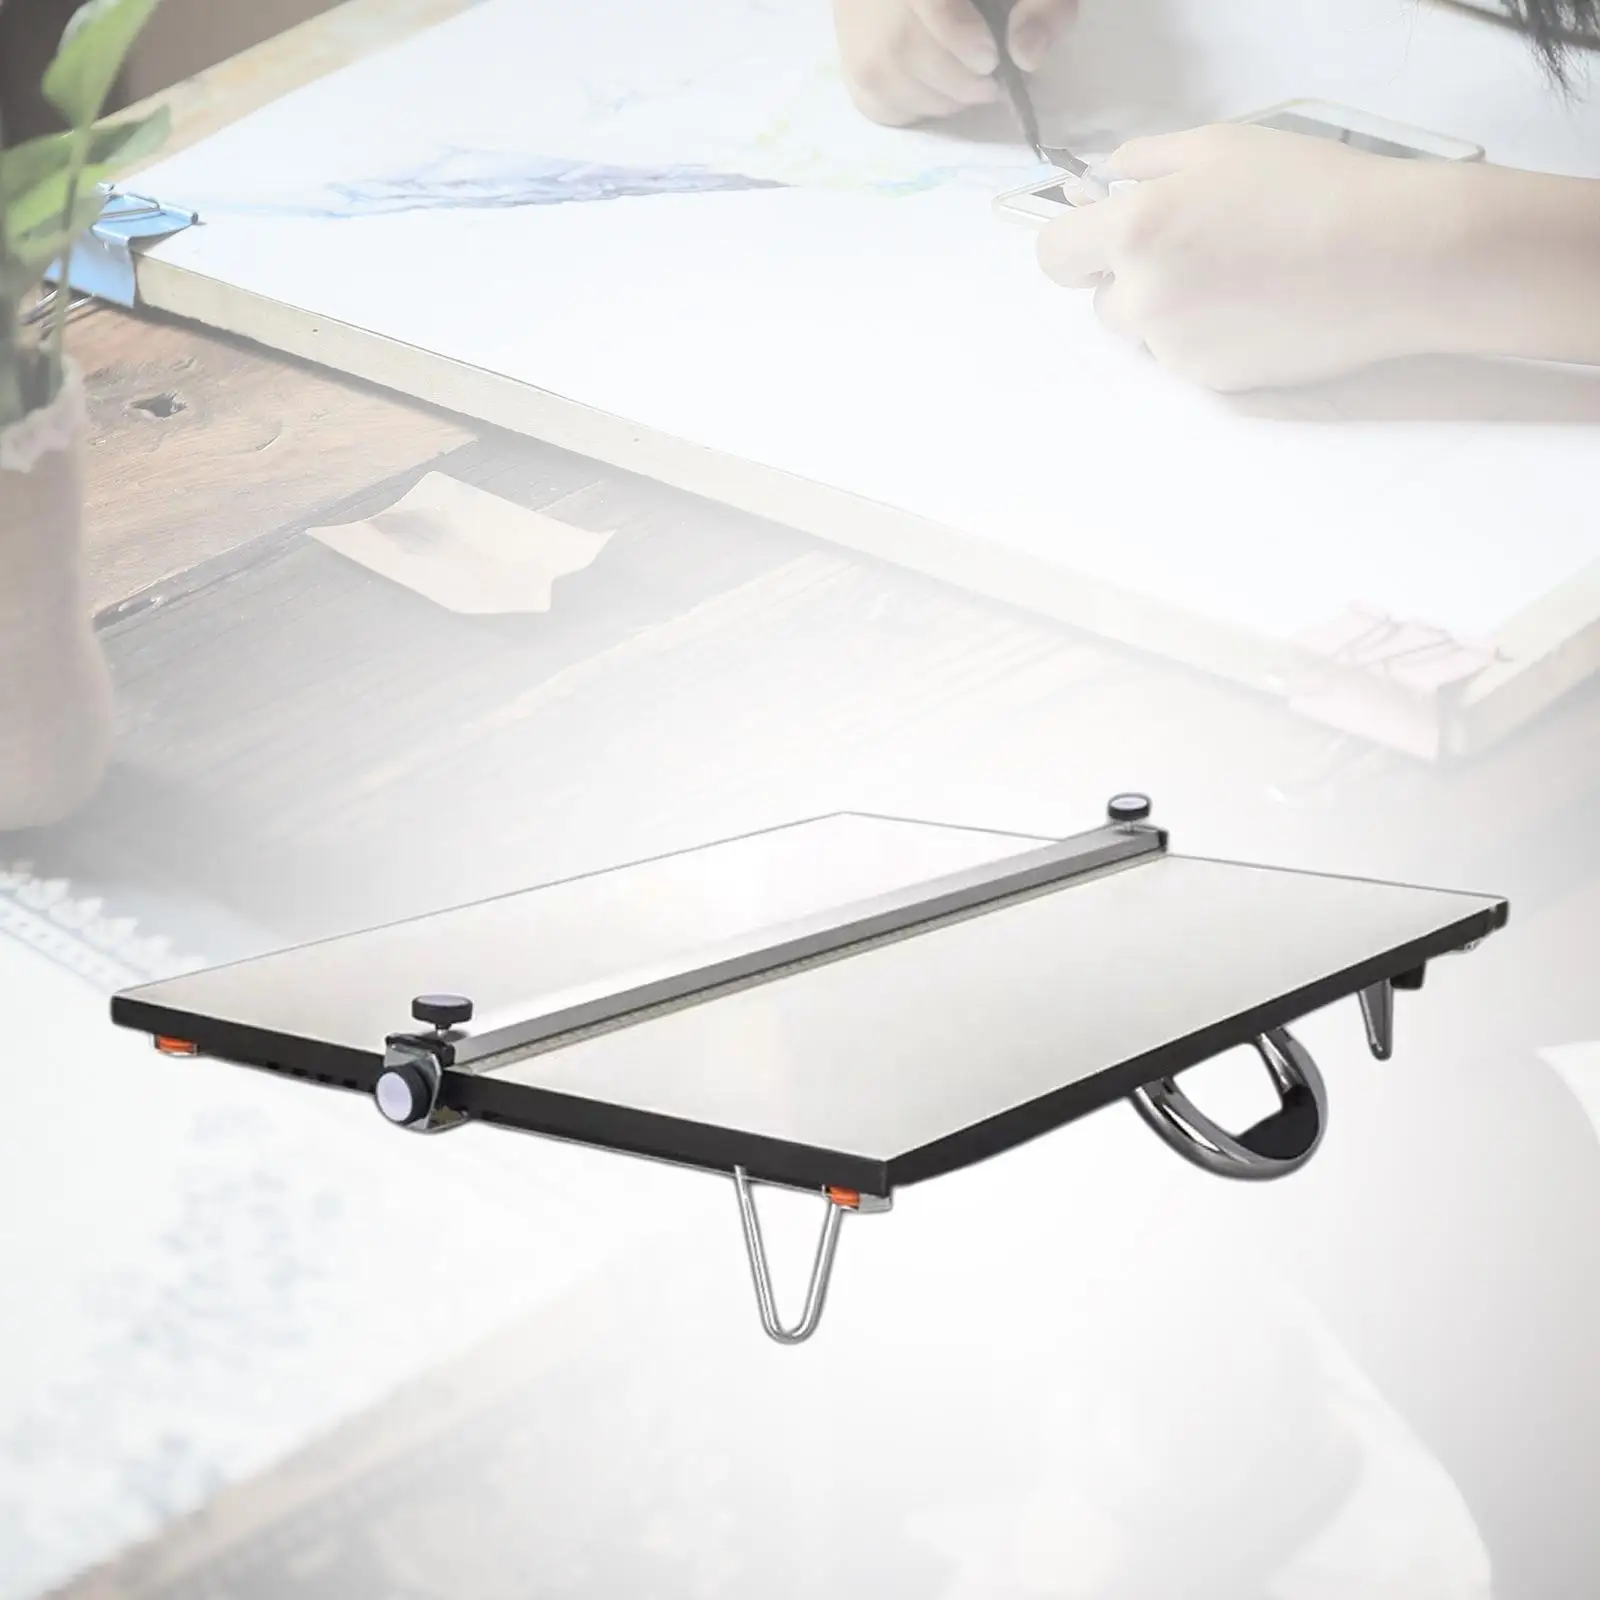 A2 Drawing Table Board 23×17inch Graphic Sketch Professional T-Square W/ Parallel Bar Support Legs for Architect Engineer Artist